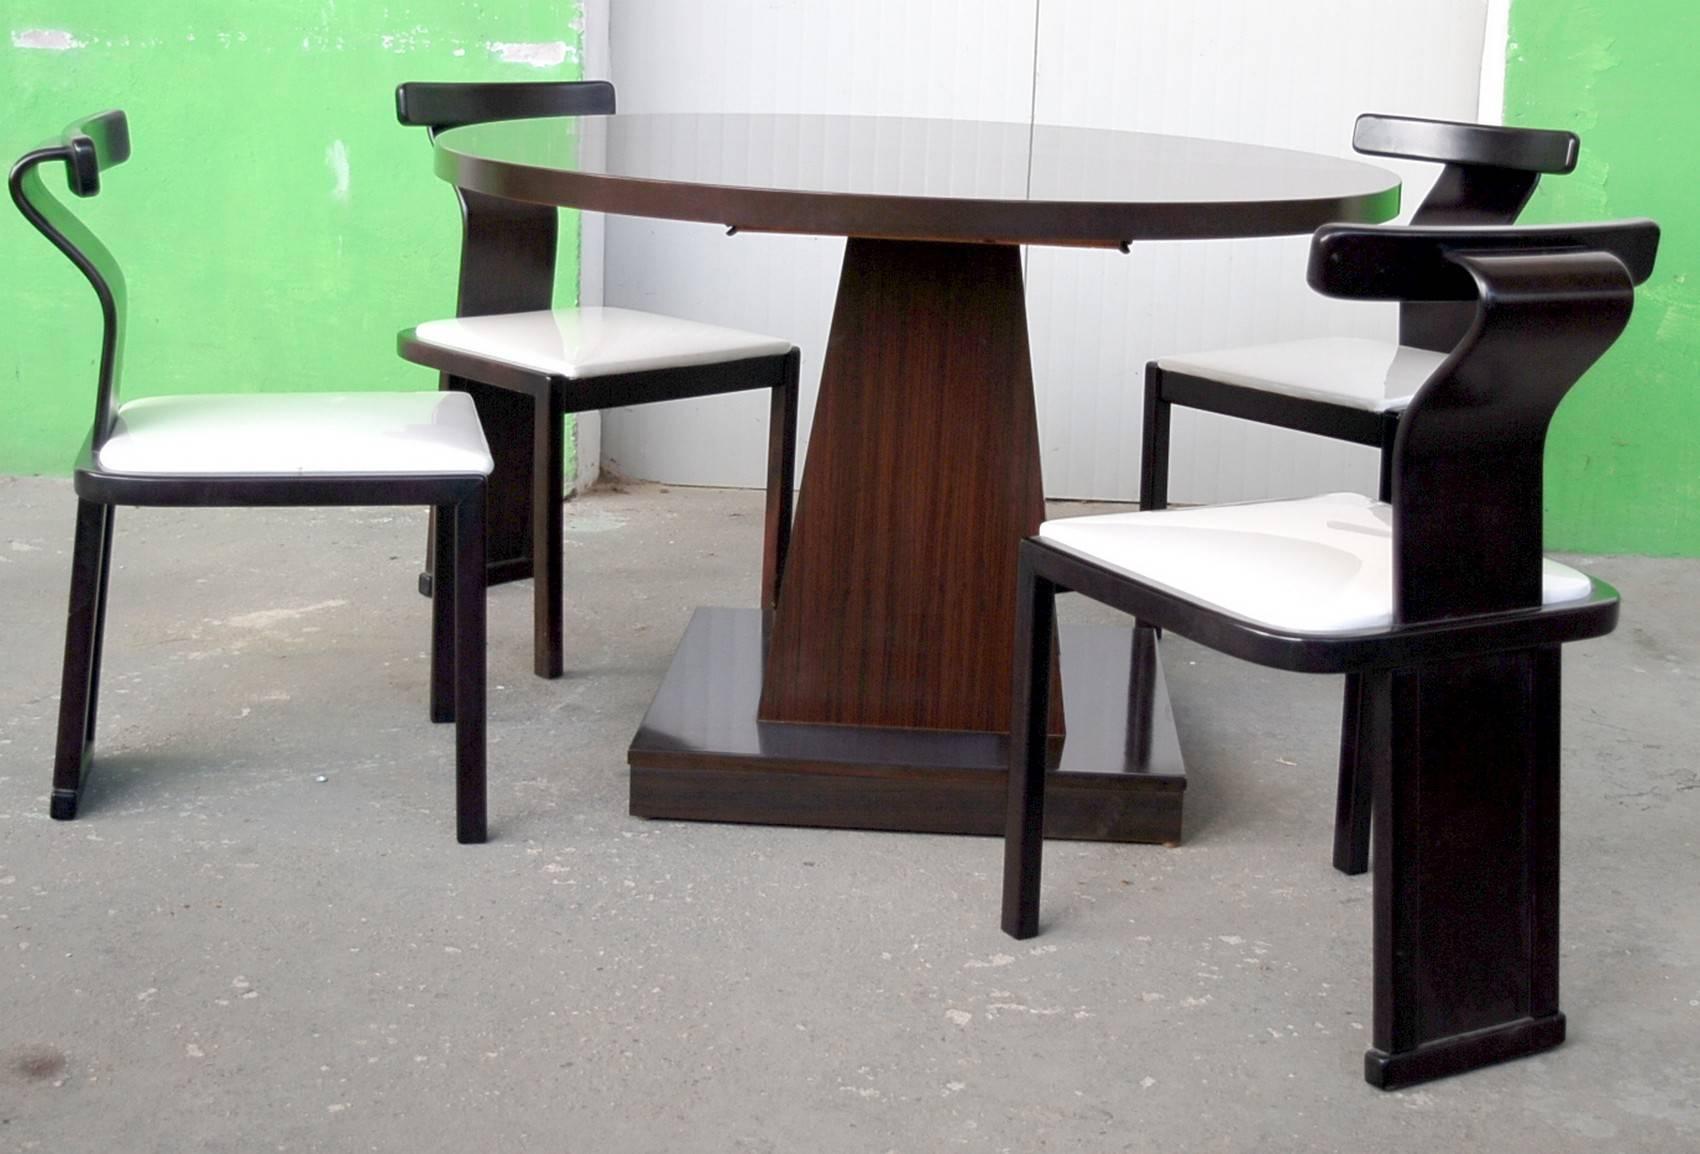 Mid-Century Modern Four Chairs and Table Midcentury Set, Saporiti, Introini and Willy Rizzo Design